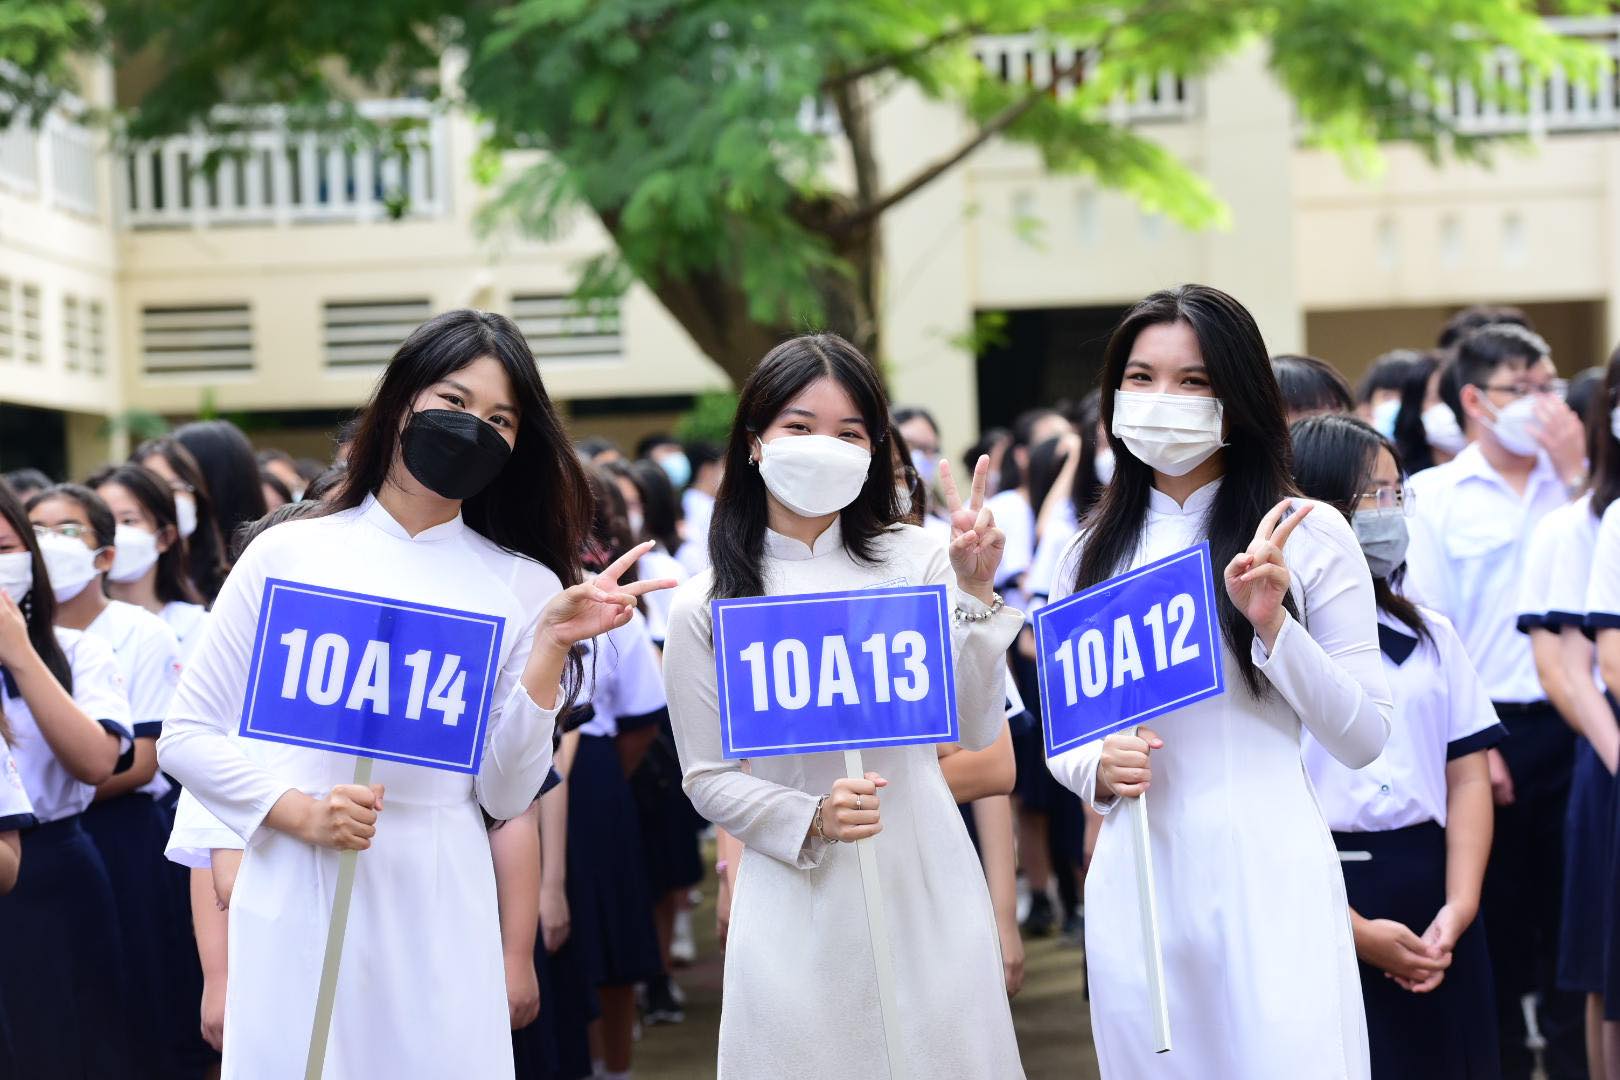 Students attend the school opening ceremony at Le Quy Don High School in District 3, Ho Chi Minh City, September 5, 2022. Photo: Duyen Phan / Tuoi Tre